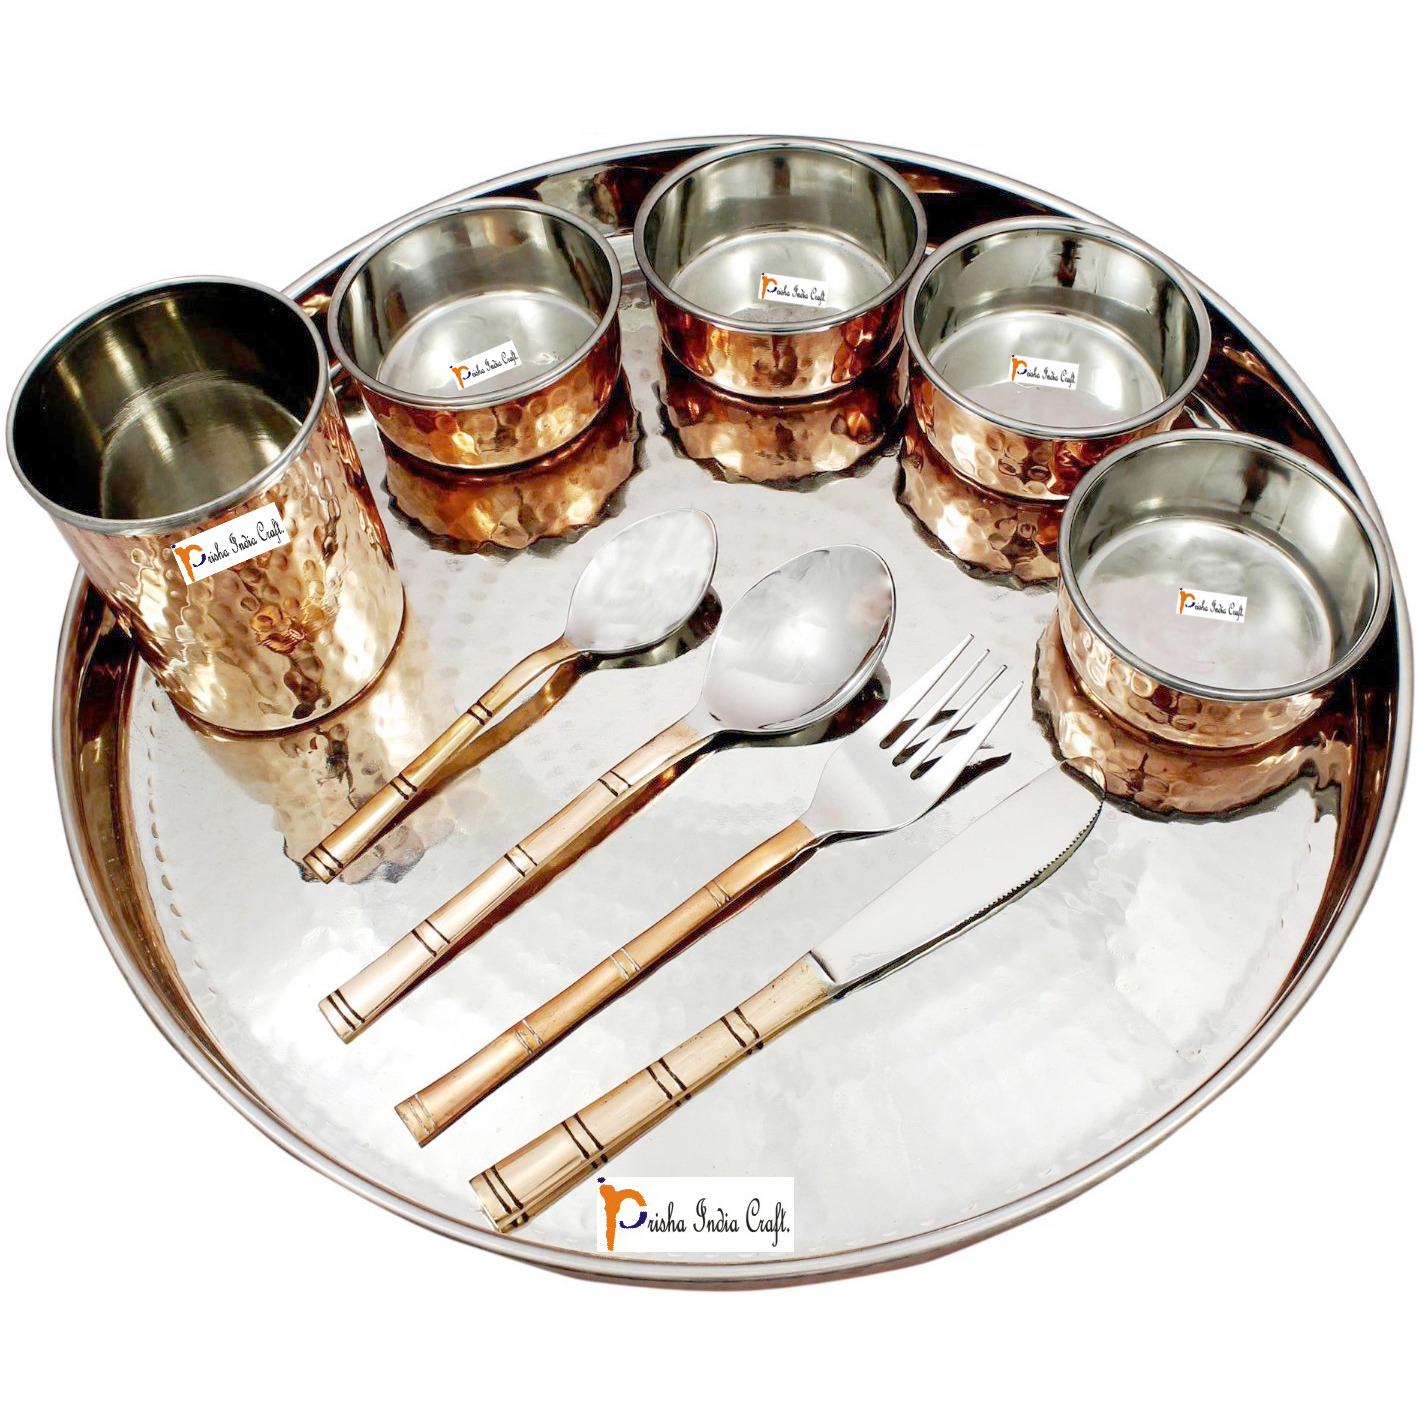 Prisha India Craft B. Set of 5 Dinnerware Traditional Stainless Steel Copper Dinner Set of Thali Plate, Bowls, Glass and Spoons, Dia 13  With 1 Pure Copper Mughal Pitcher Jug - Christmas Gift